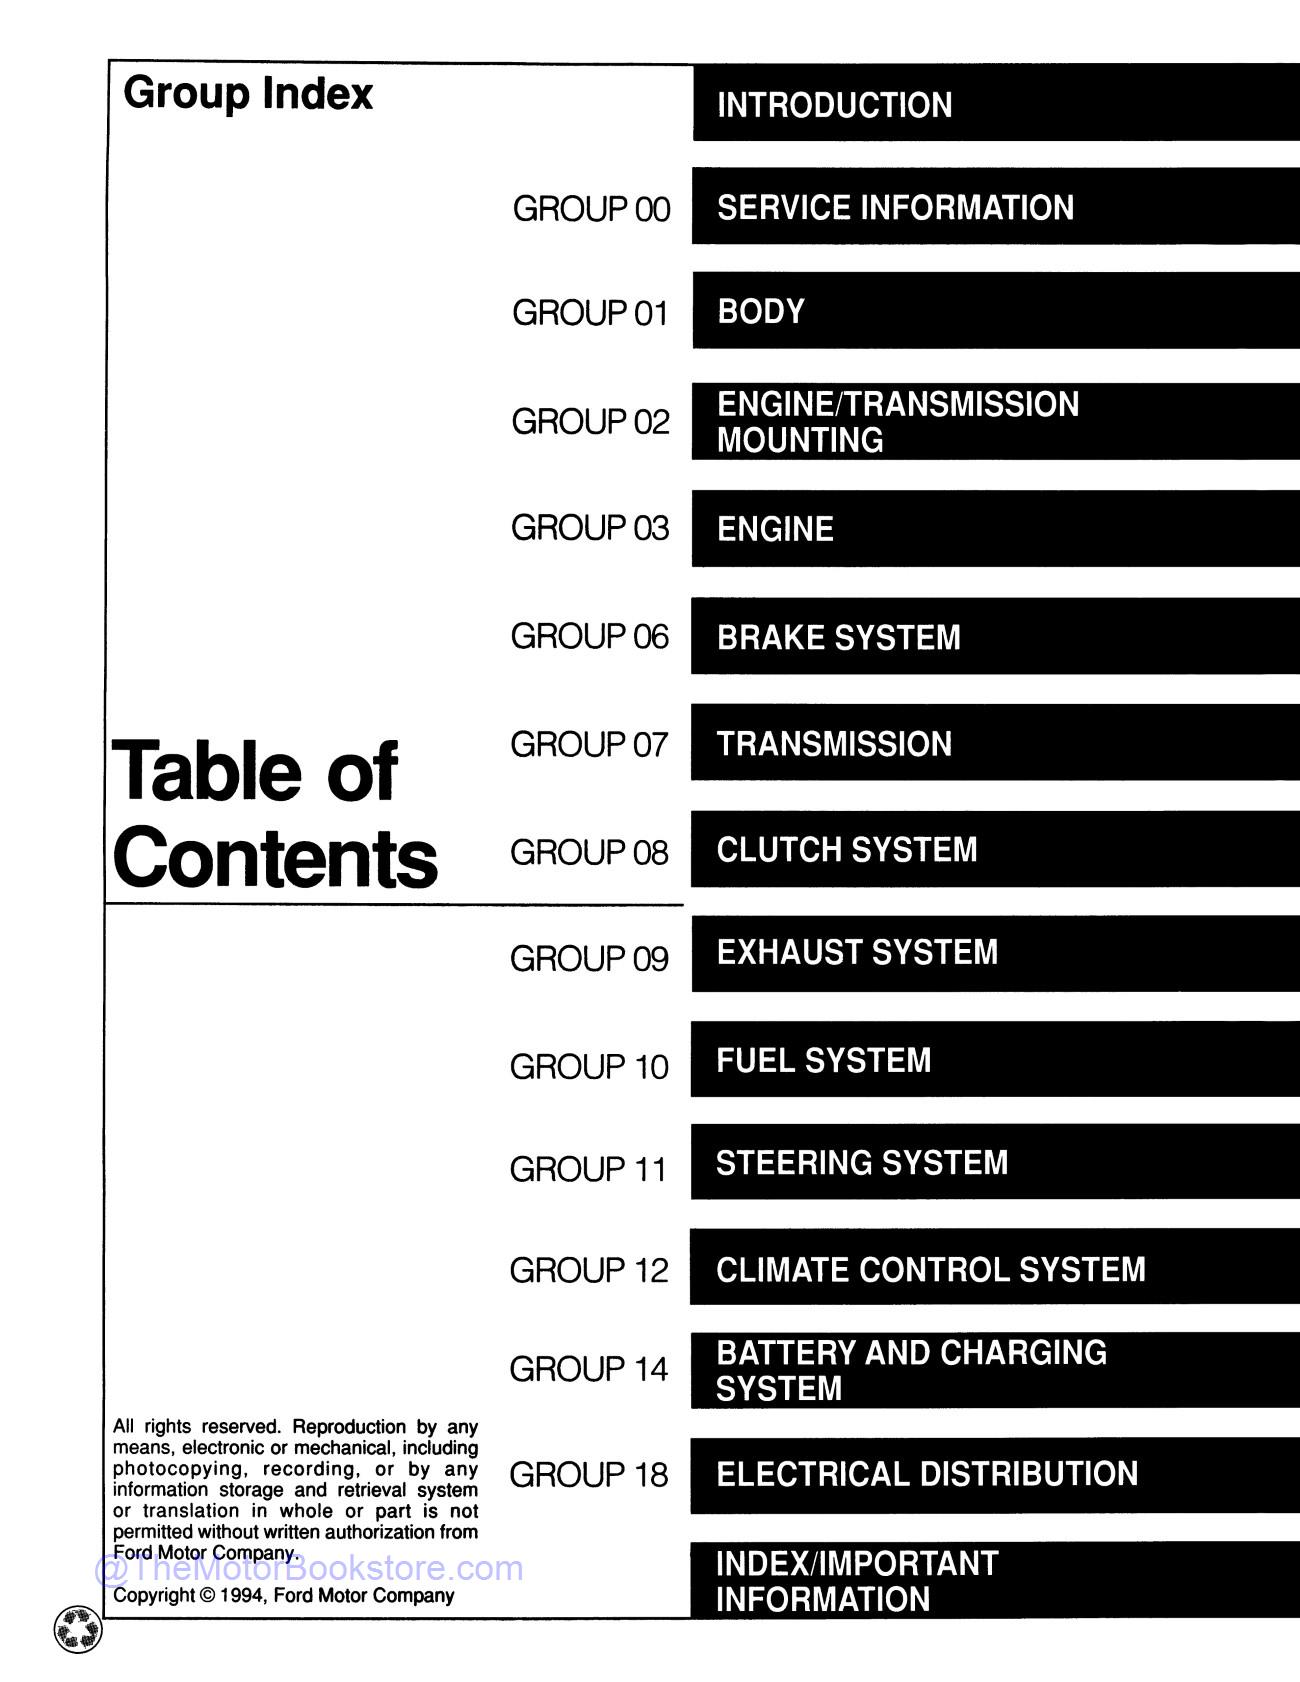 1994 Ford 7.3L DI Turbo Diesel Service Manual Supplement  - Table of Contents